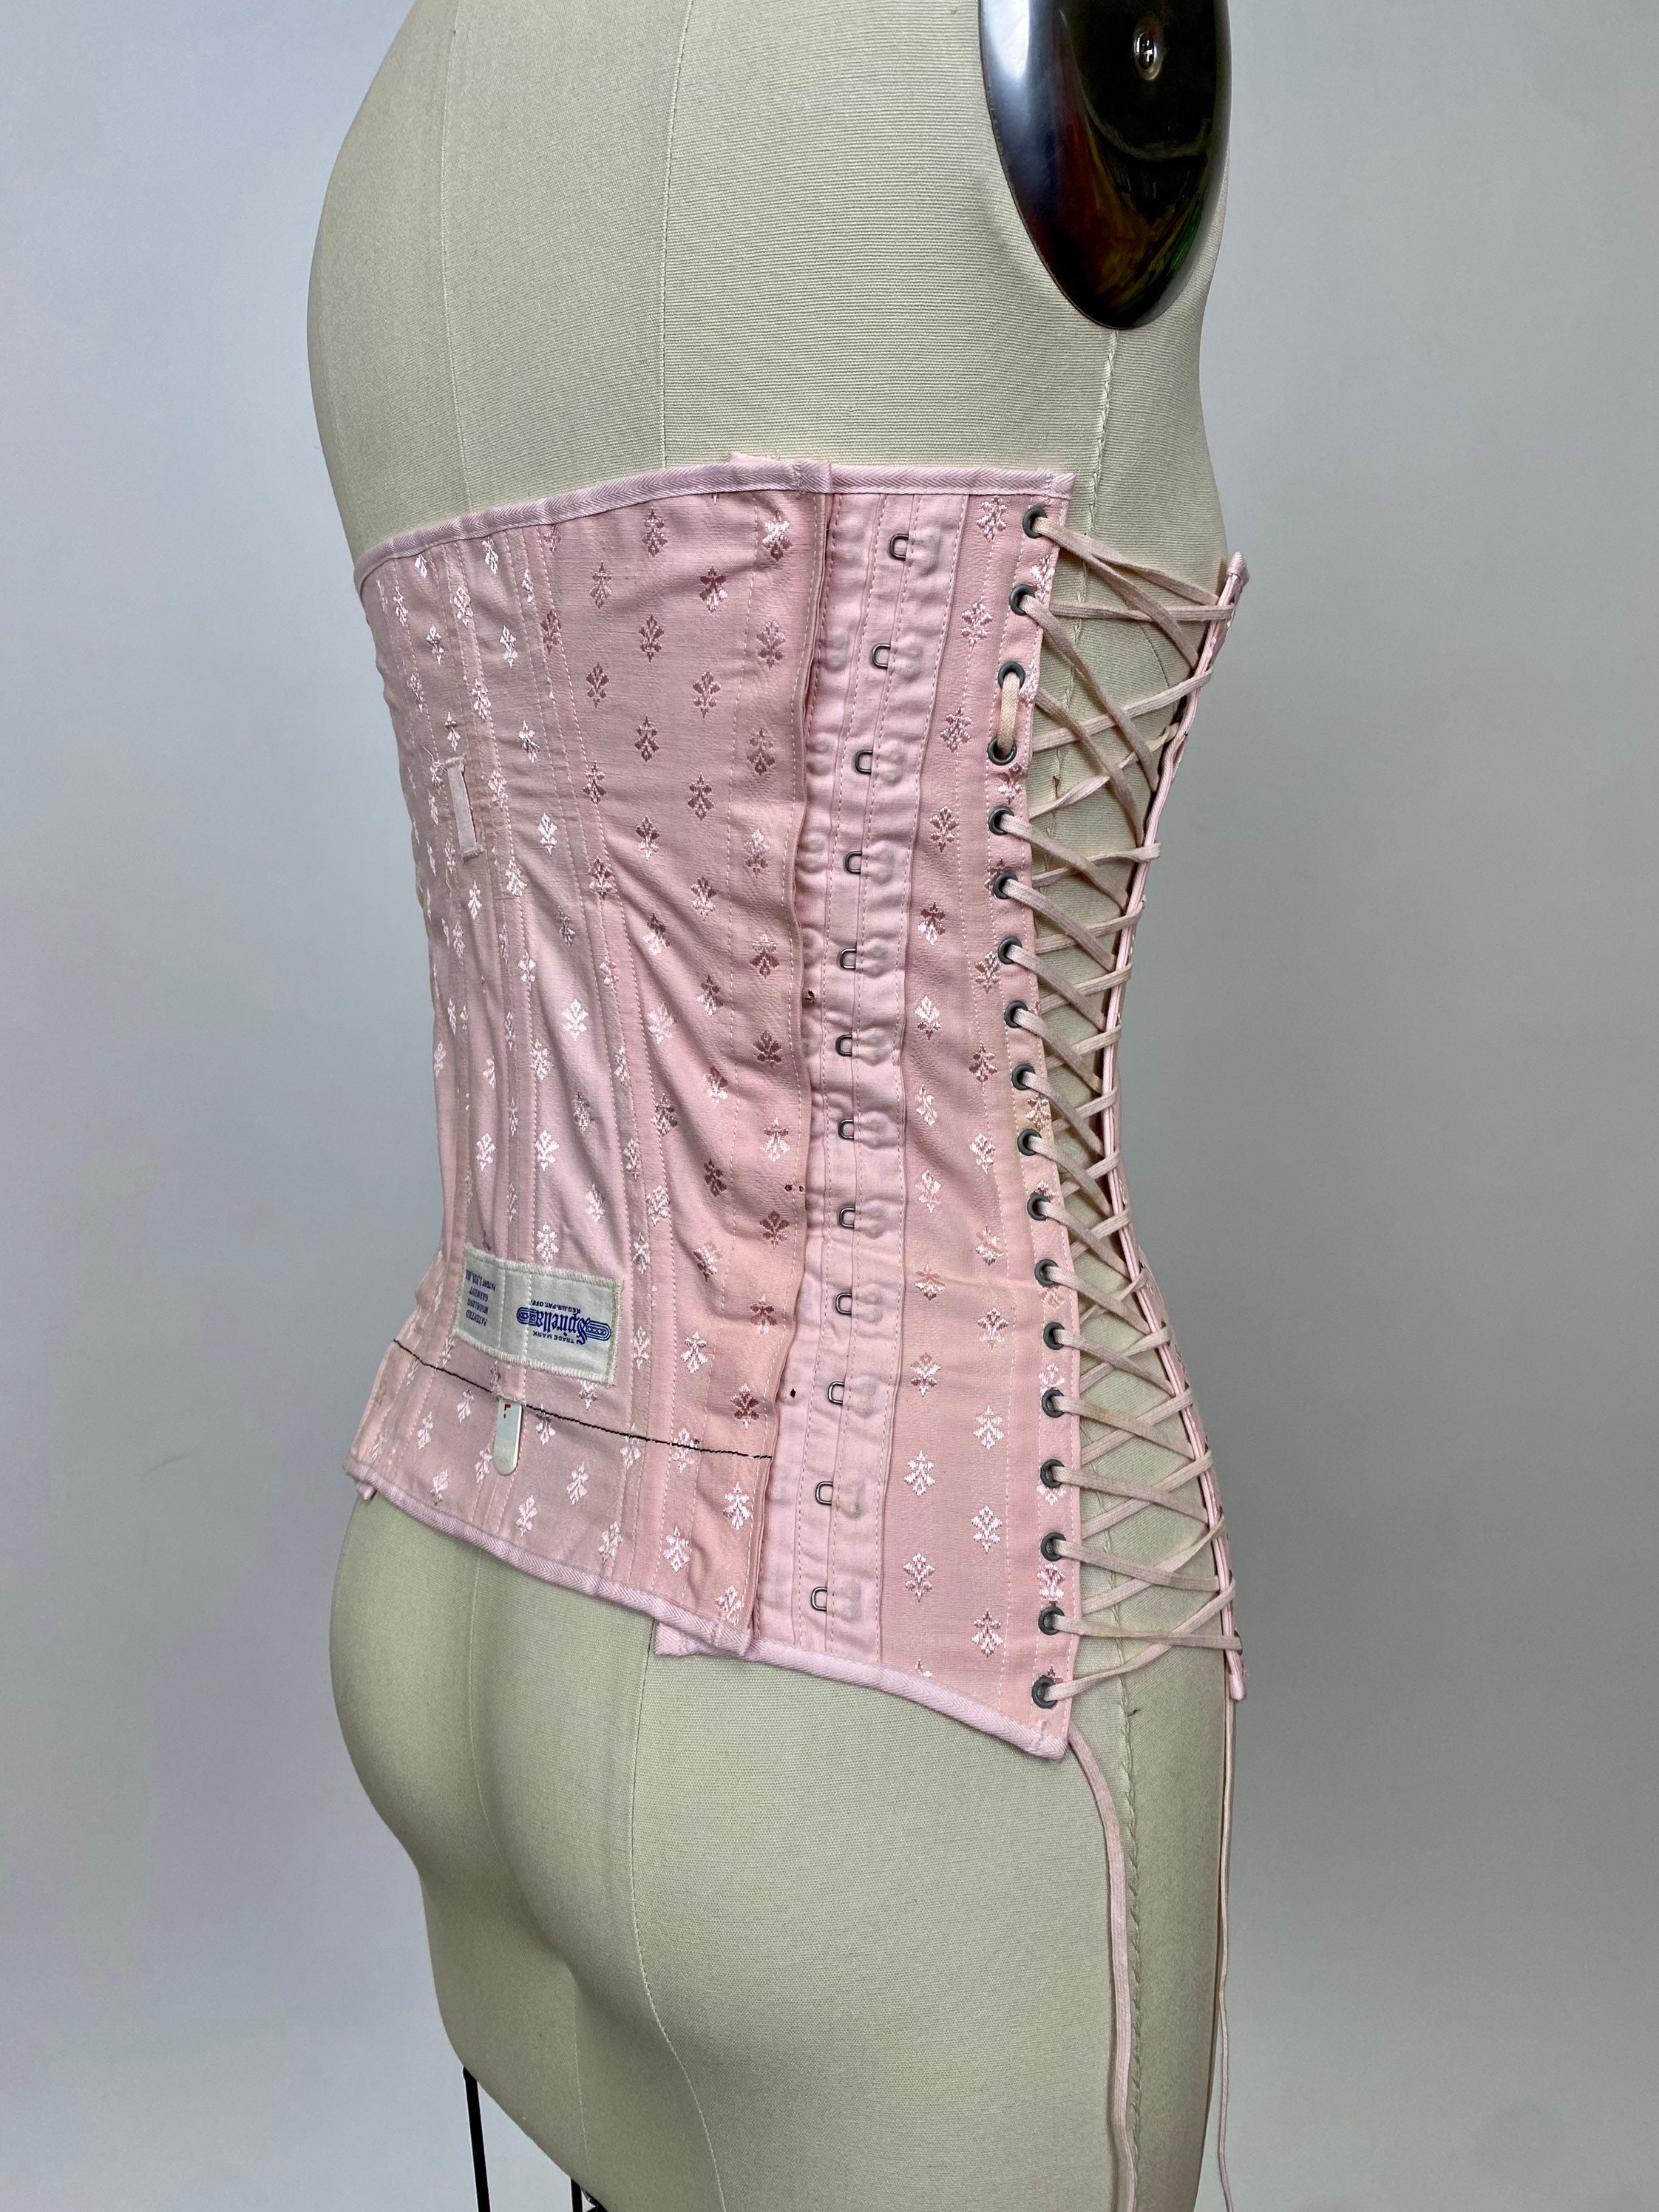 Rare Vintage Early 1900s Spirella Corset, Bustier, Lace up Undergarment  With Original Cover, Size Slender, Body Shaper, Pale Blush Pink -  New  Zealand